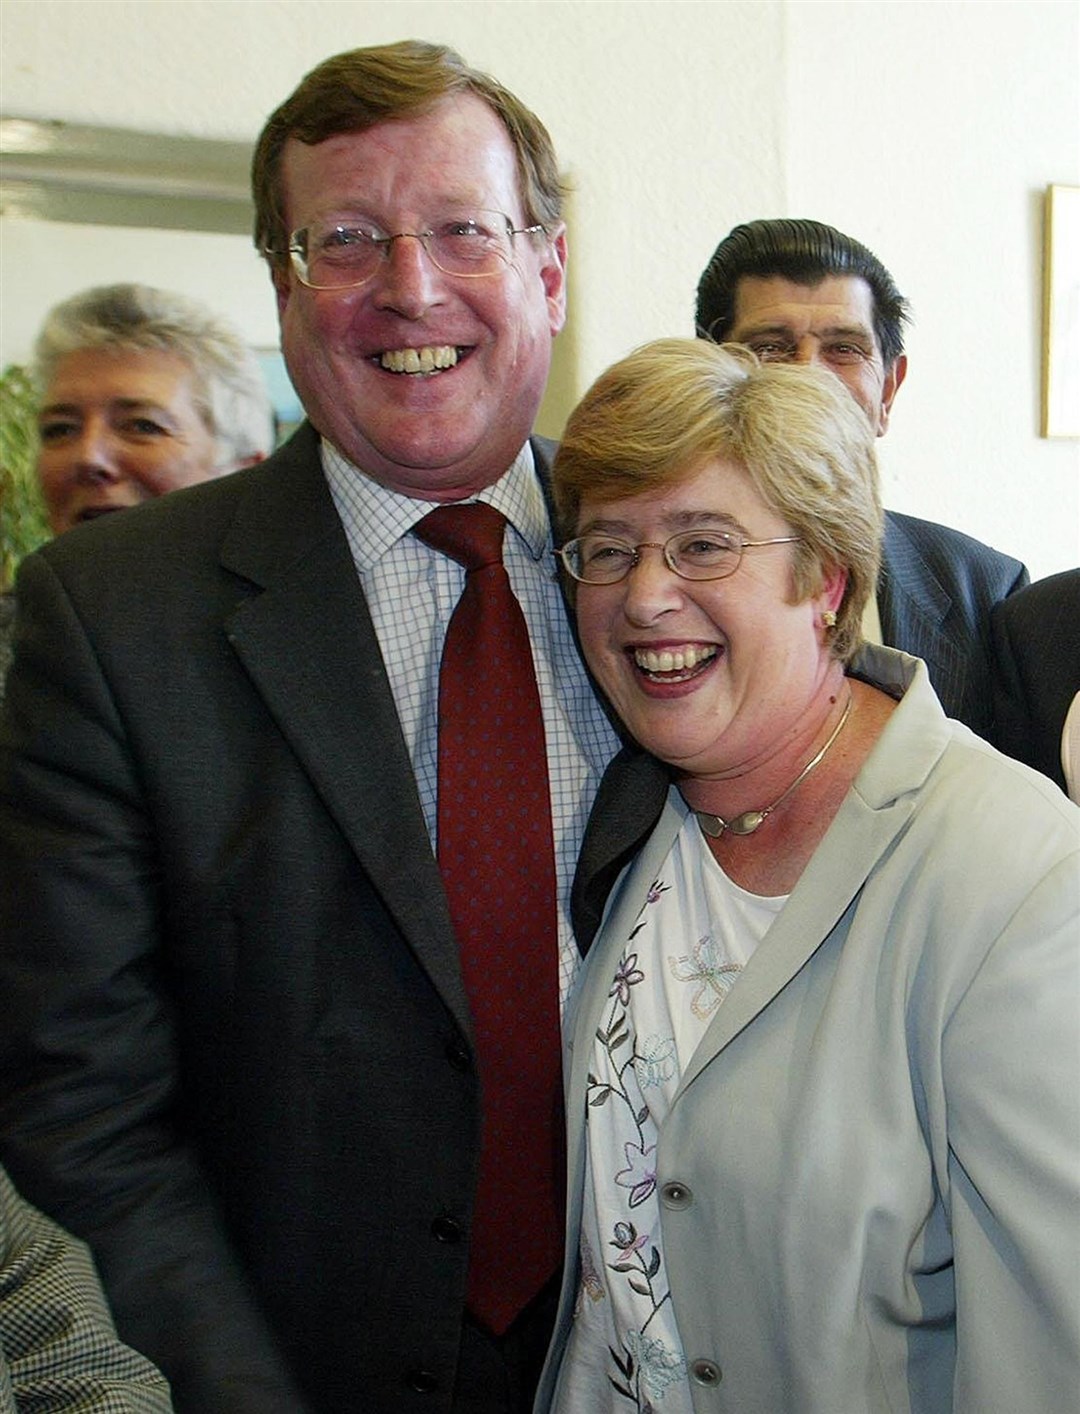 Ulster Unionist leader David Trimble with his wife Daphne (Paul Faith/PA)